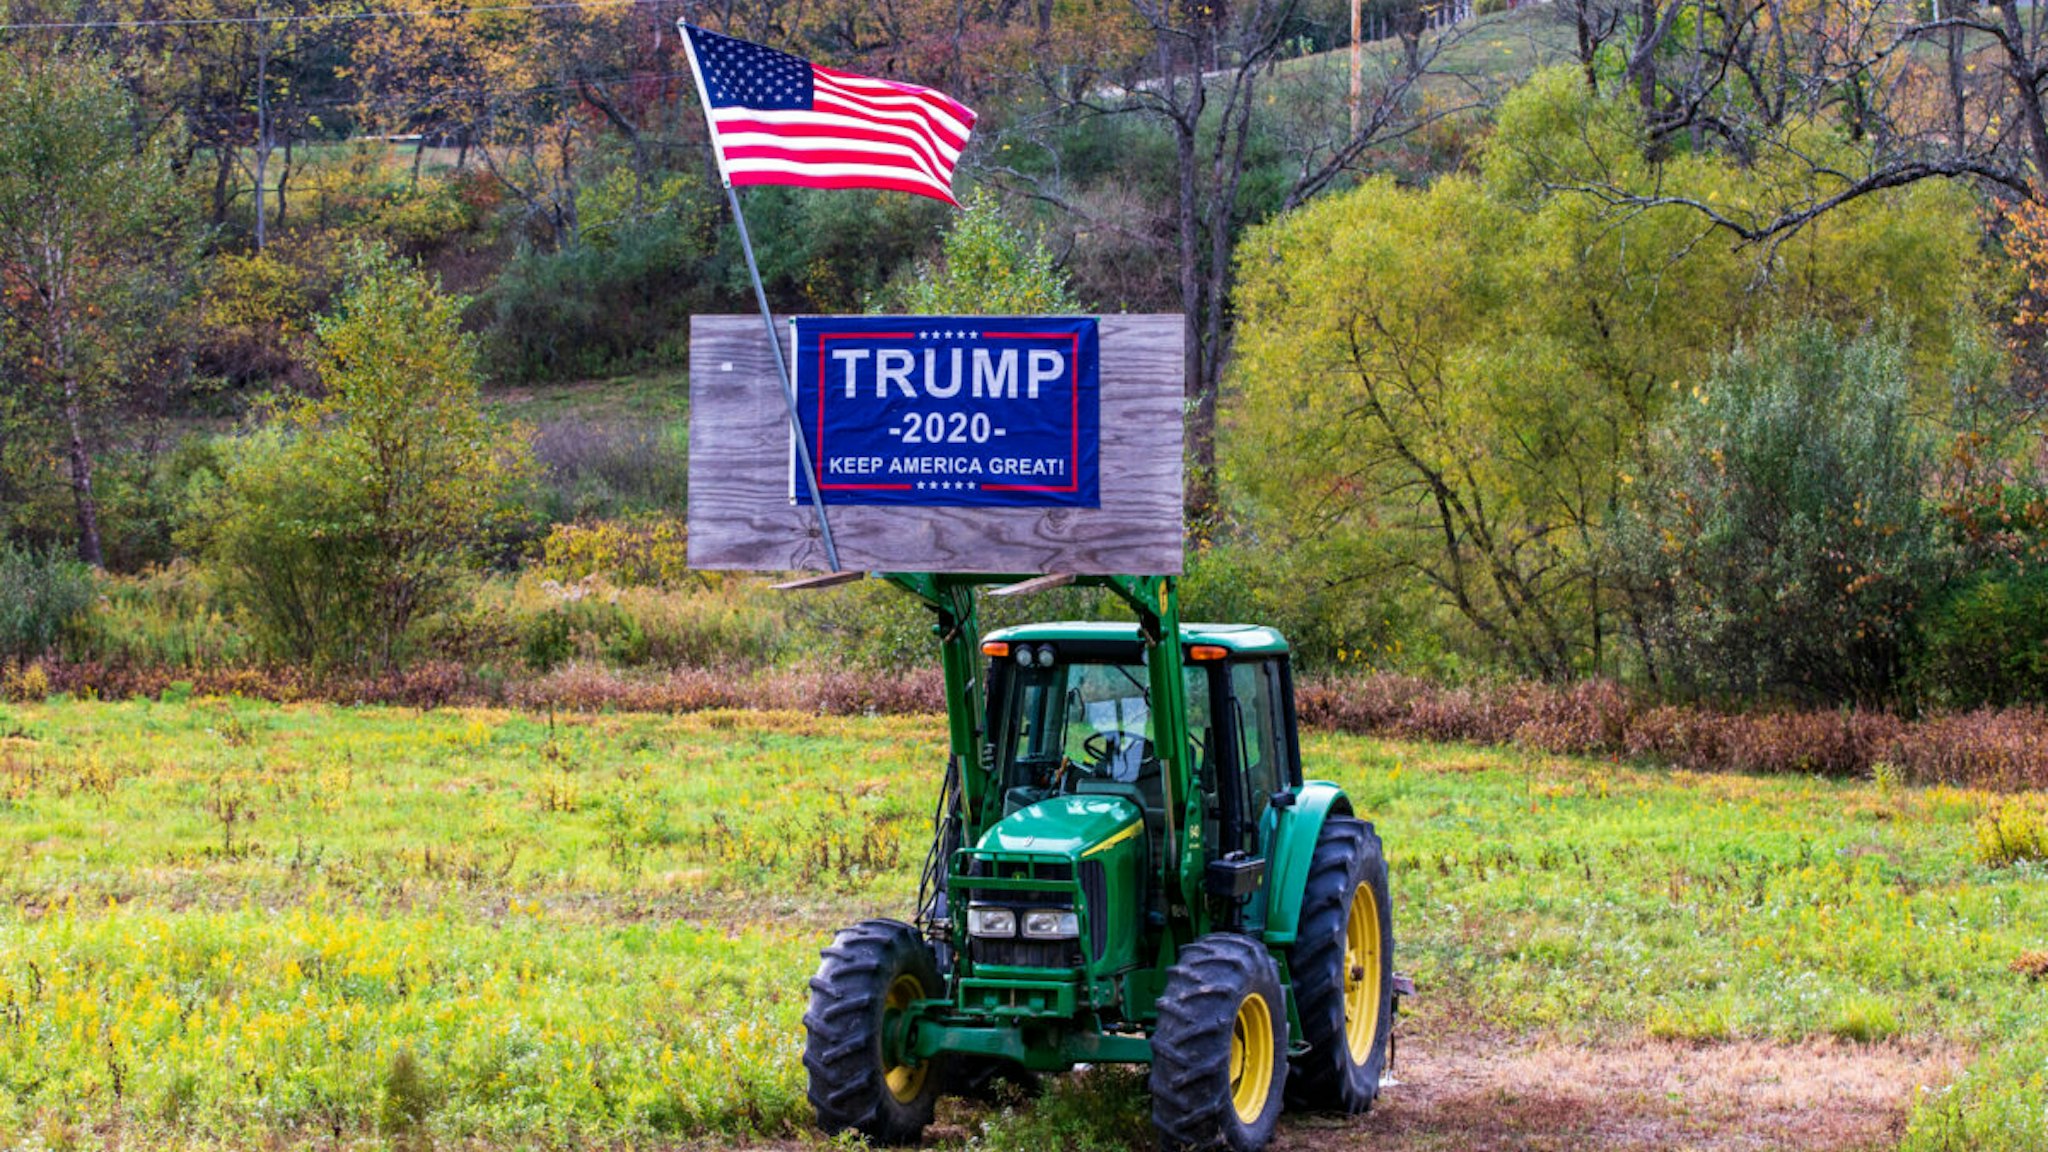 A Trump 2020 re-election sign and an American flag are displayed on a piece of farm equipment in Valley Township, Montour County, Pennsylvania.